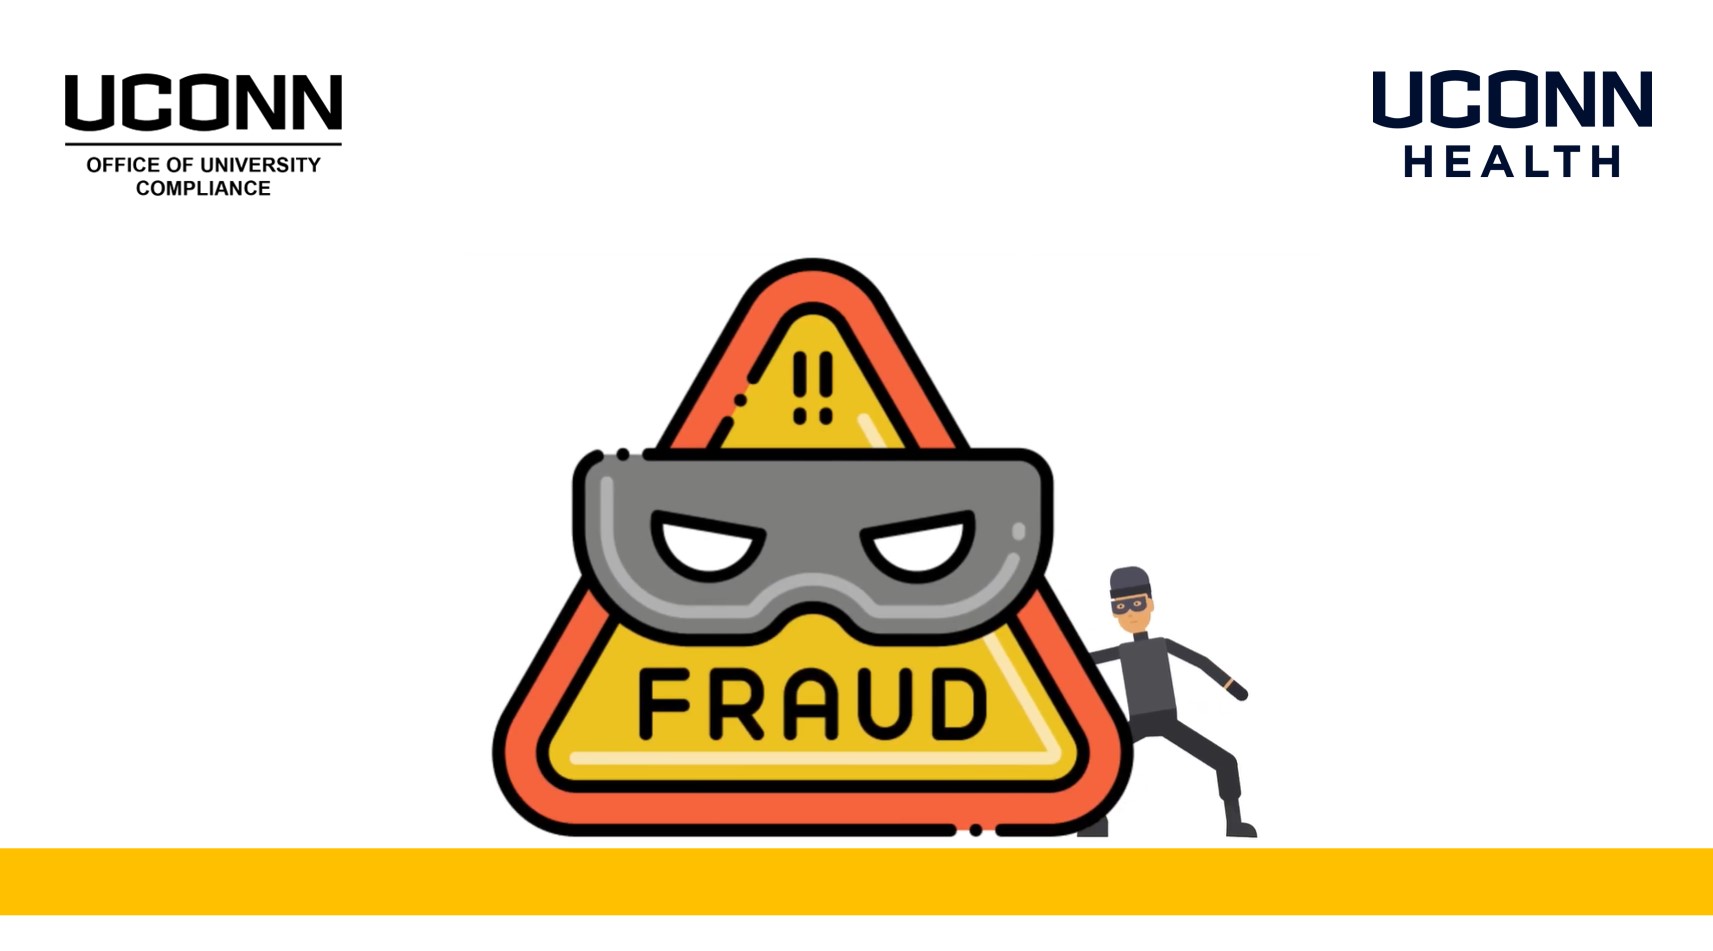 FRAUD PREVENTION & REPORTING